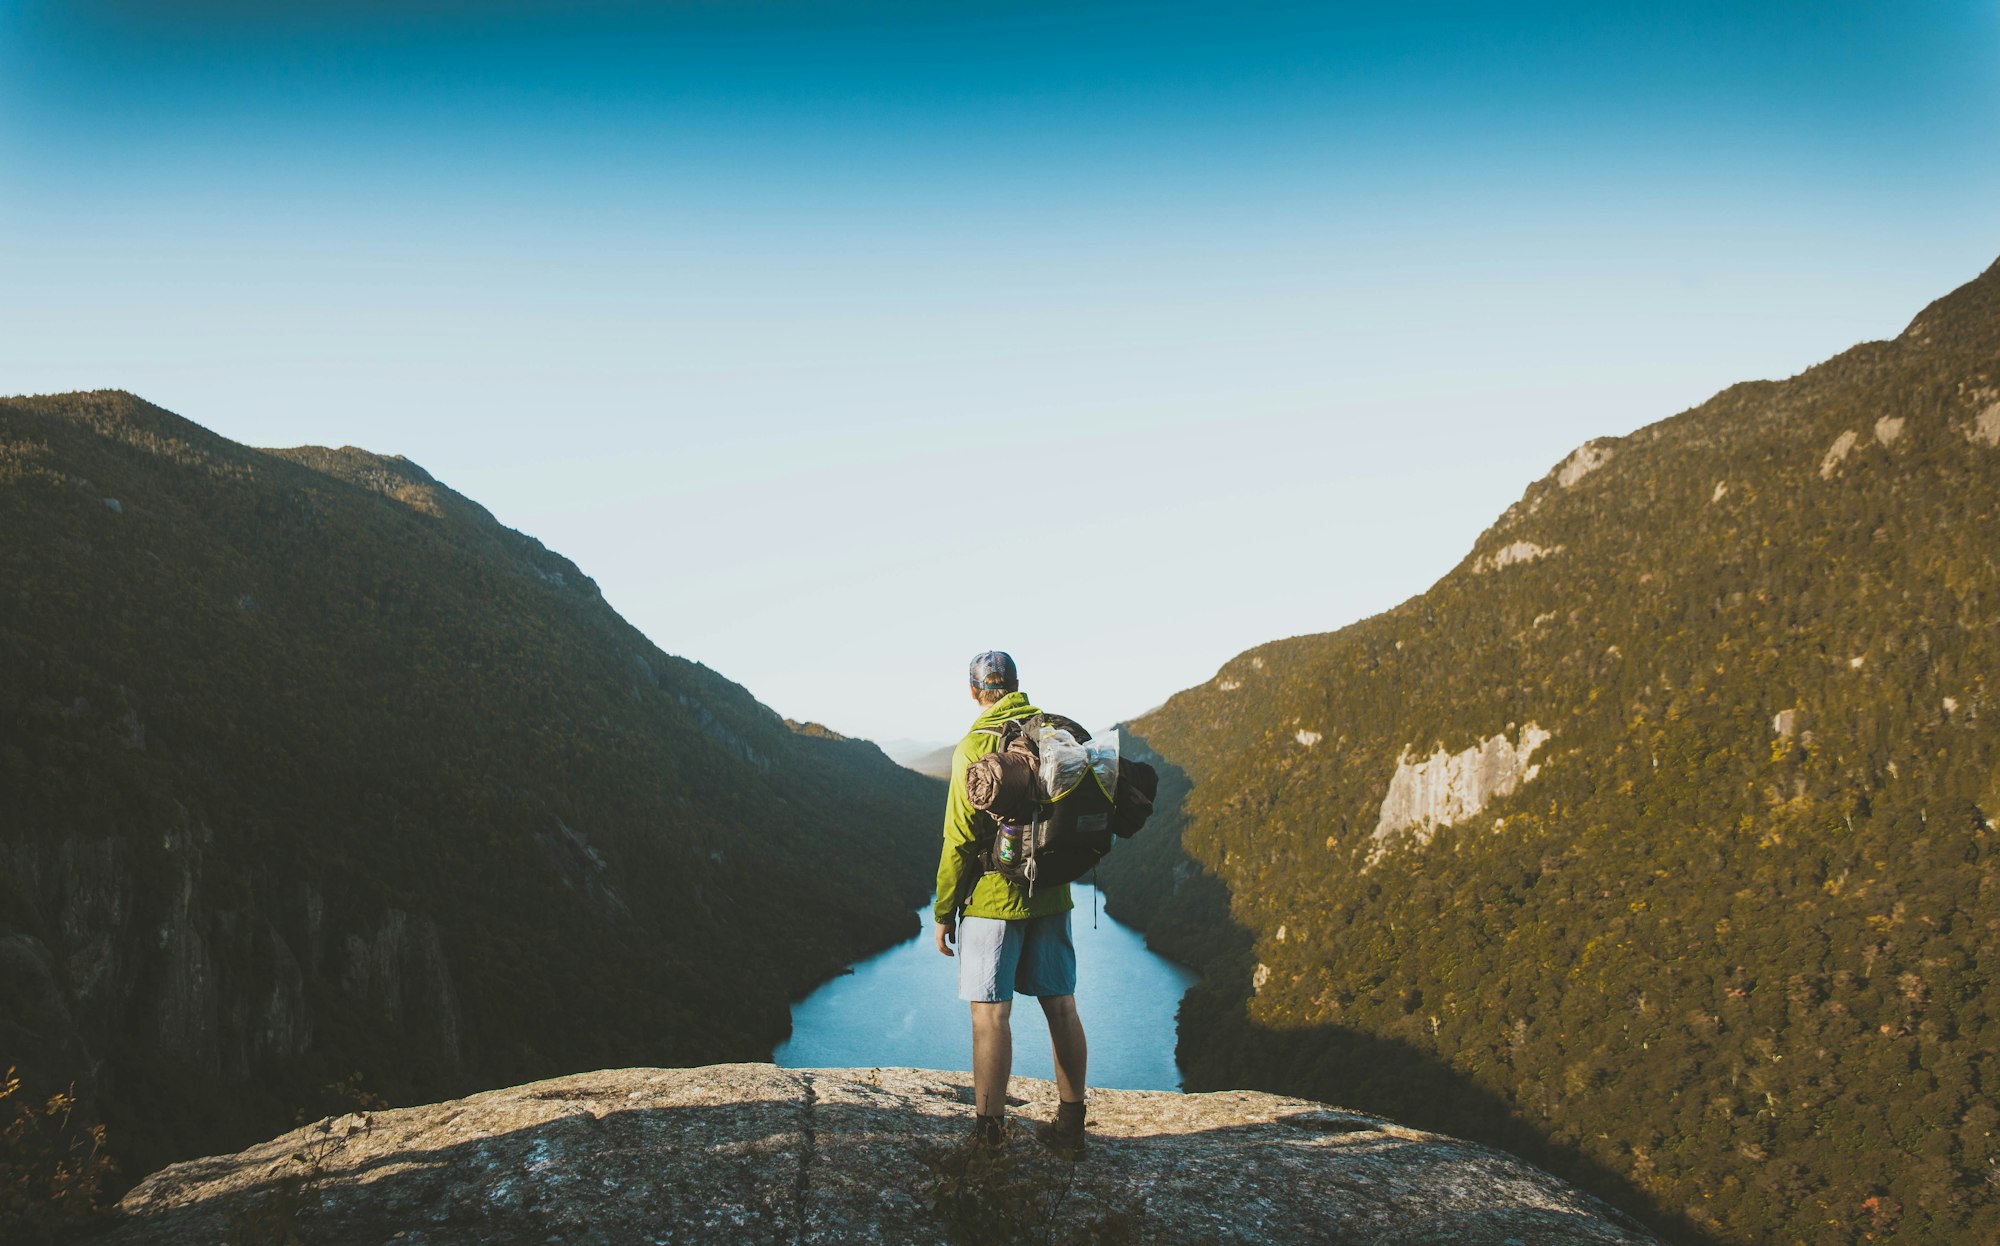 How To Go Backpacking For The First Time?